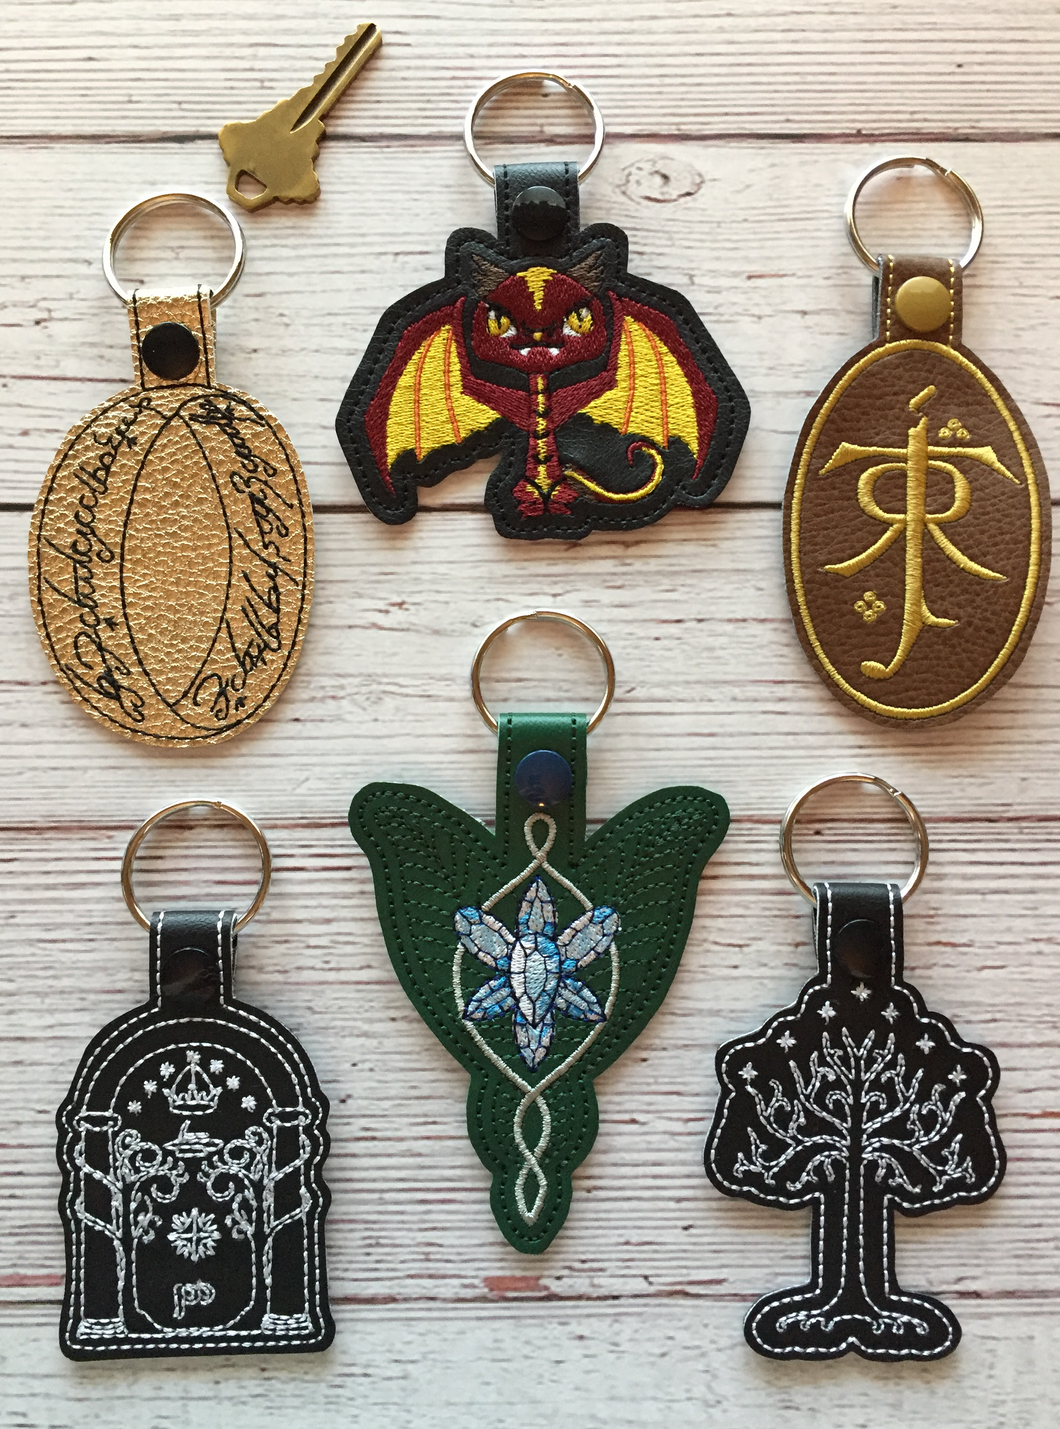 Key Fobs Inspired By A Fantasy World - Keychains - Backpack Decoration - Bag Bling